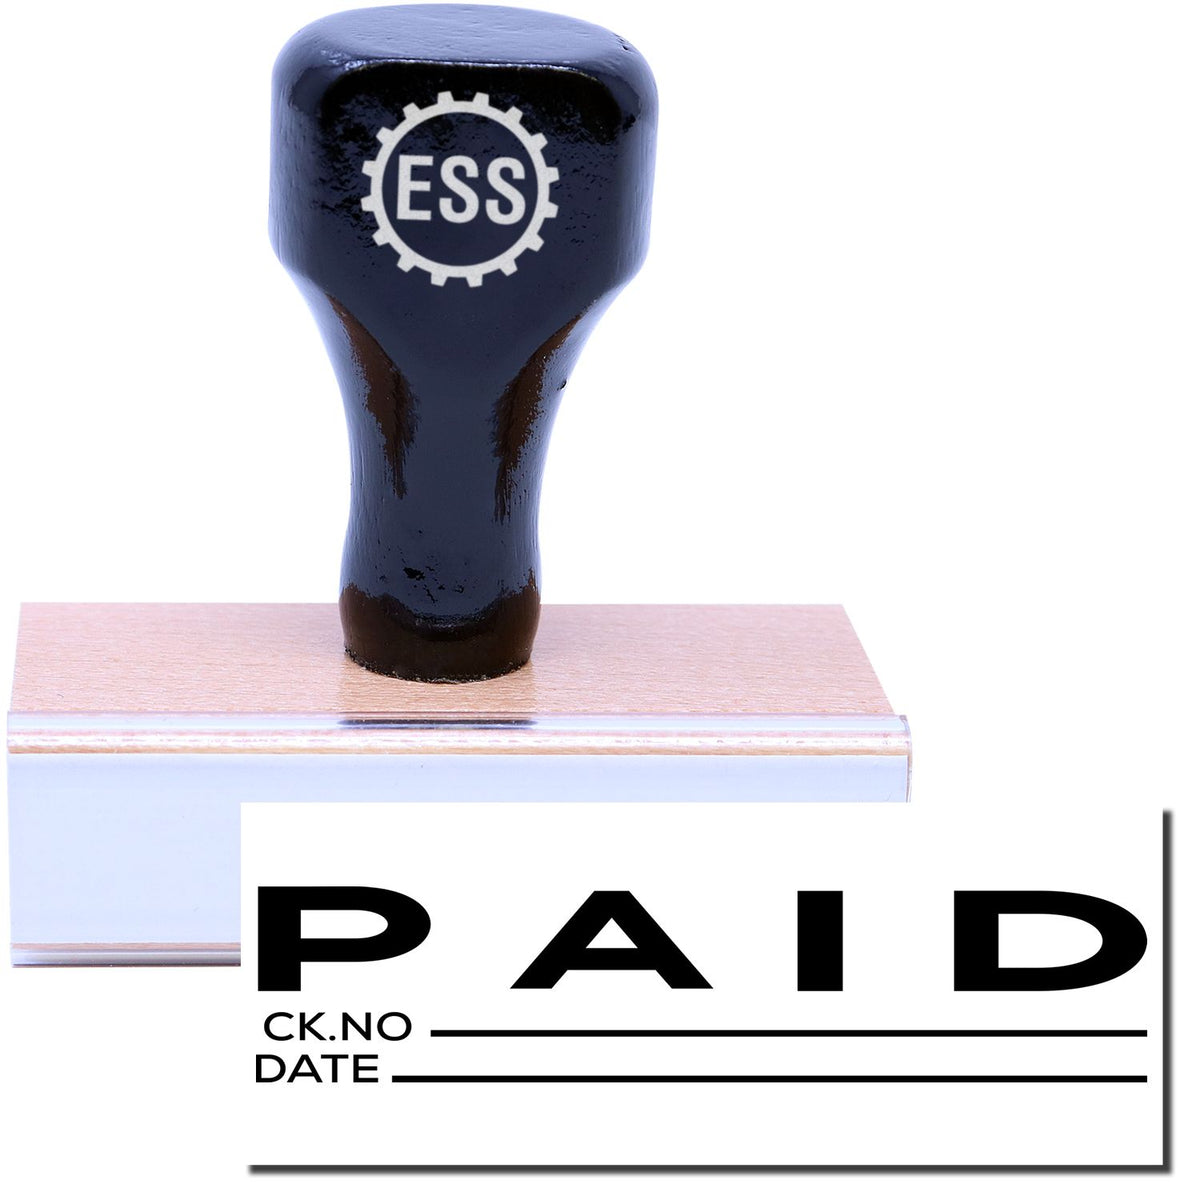 A stock office rubber stamp with a stamped image showing how the text &quot;PAID&quot; in a large font with space where you can write down both the check number and the date is displayed after stamping.